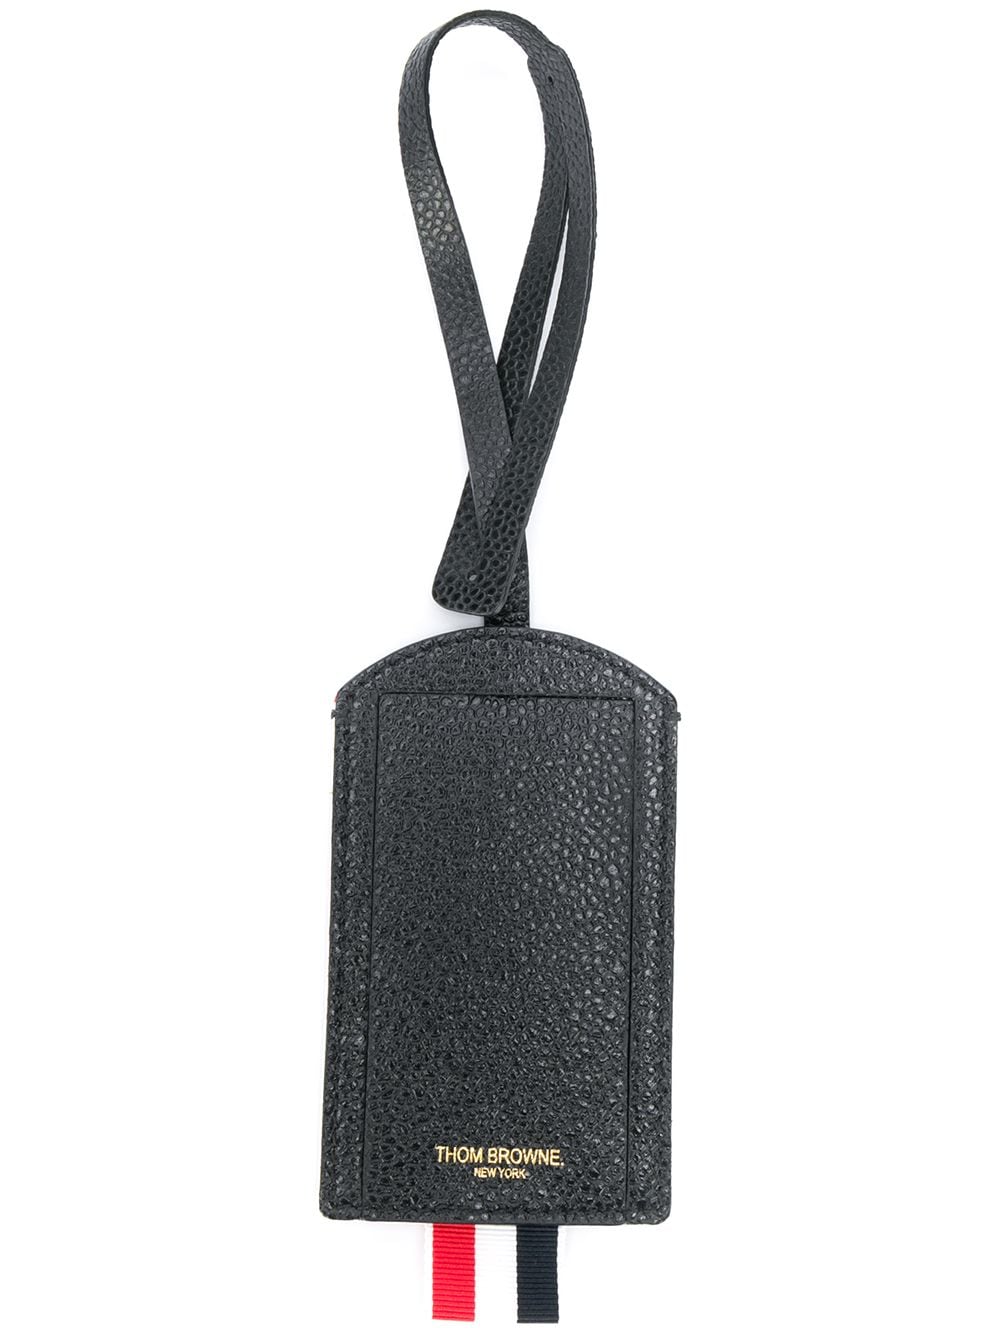 Image 1 of Thom Browne logo patch luggage tag